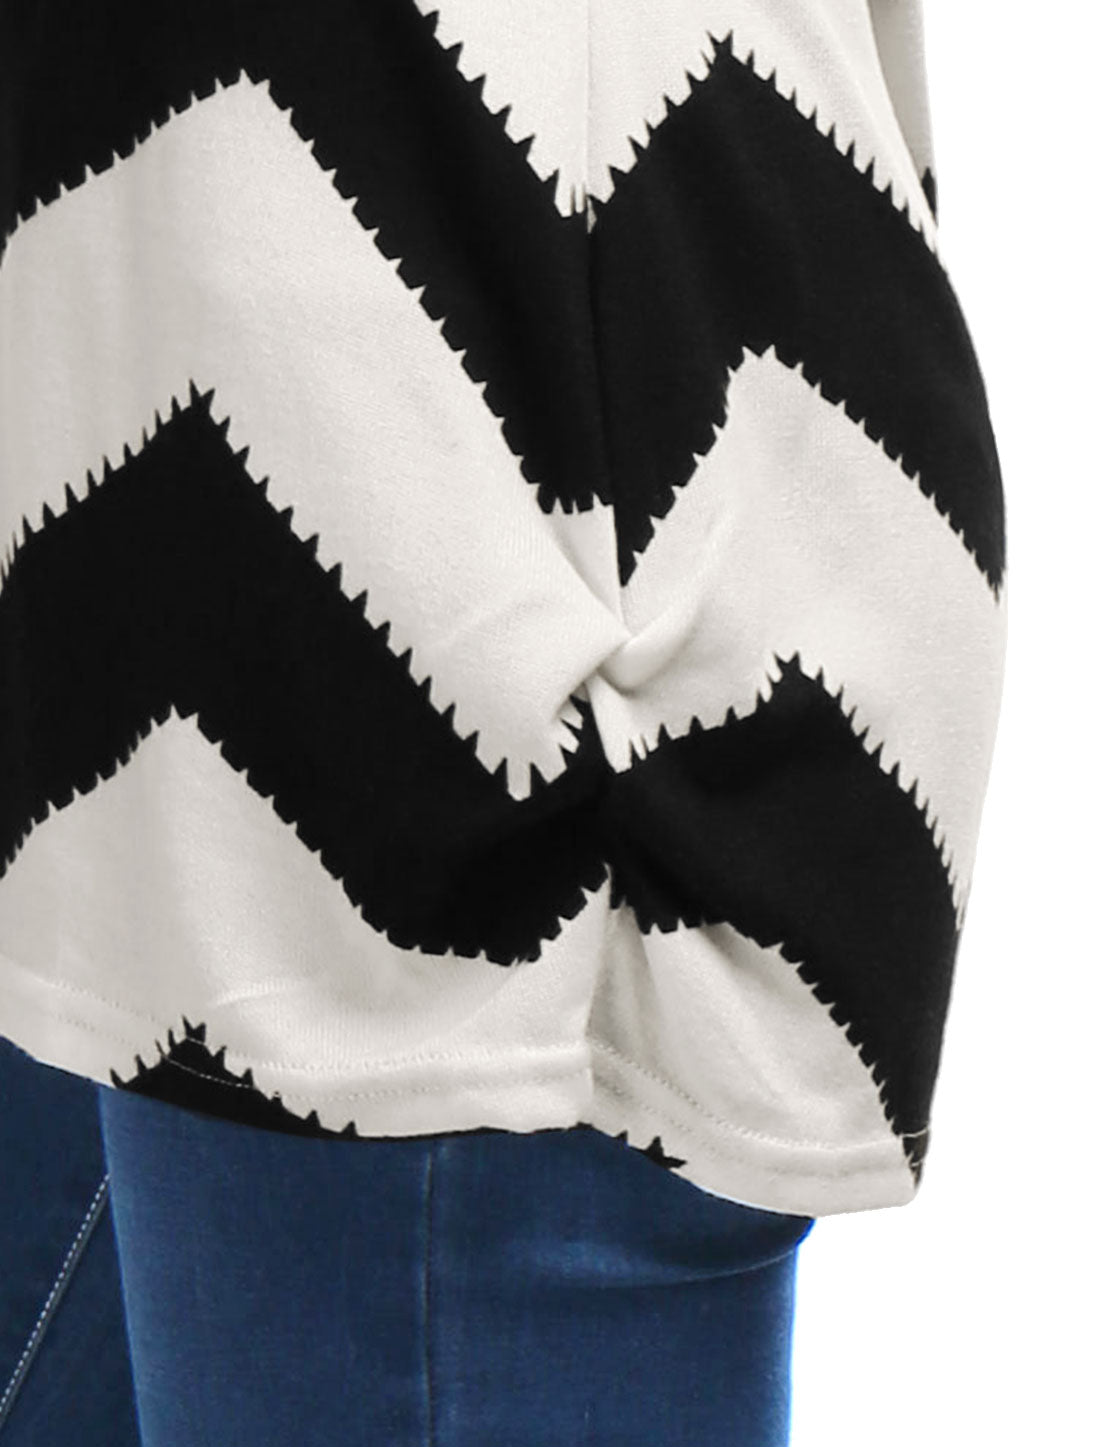 Allegra K Round Neck Contrast Color Knitted Shirt Long Sleeve Sweater Tops